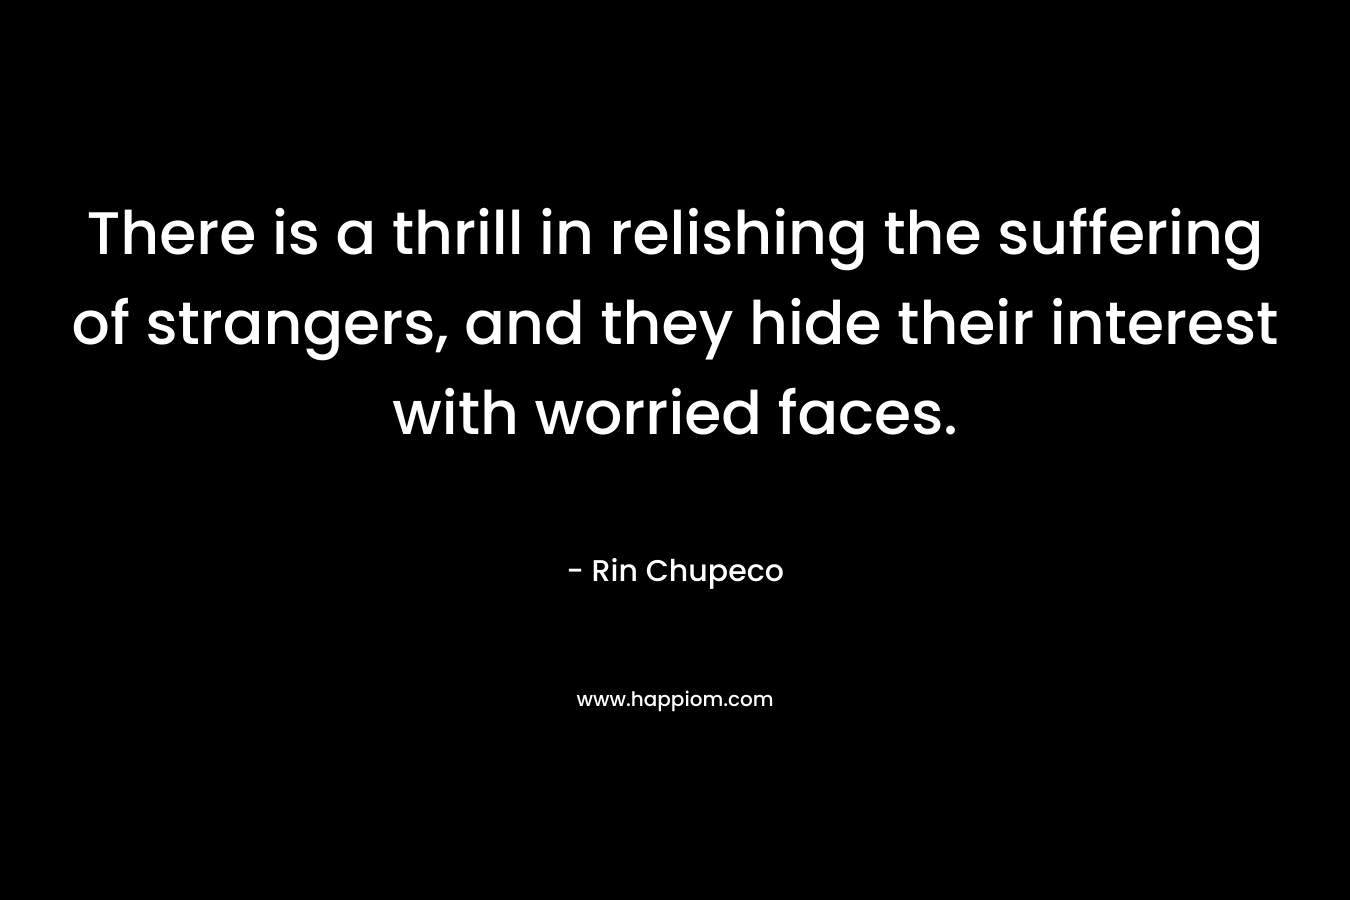 There is a thrill in relishing the suffering of strangers, and they hide their interest with worried faces. – Rin Chupeco